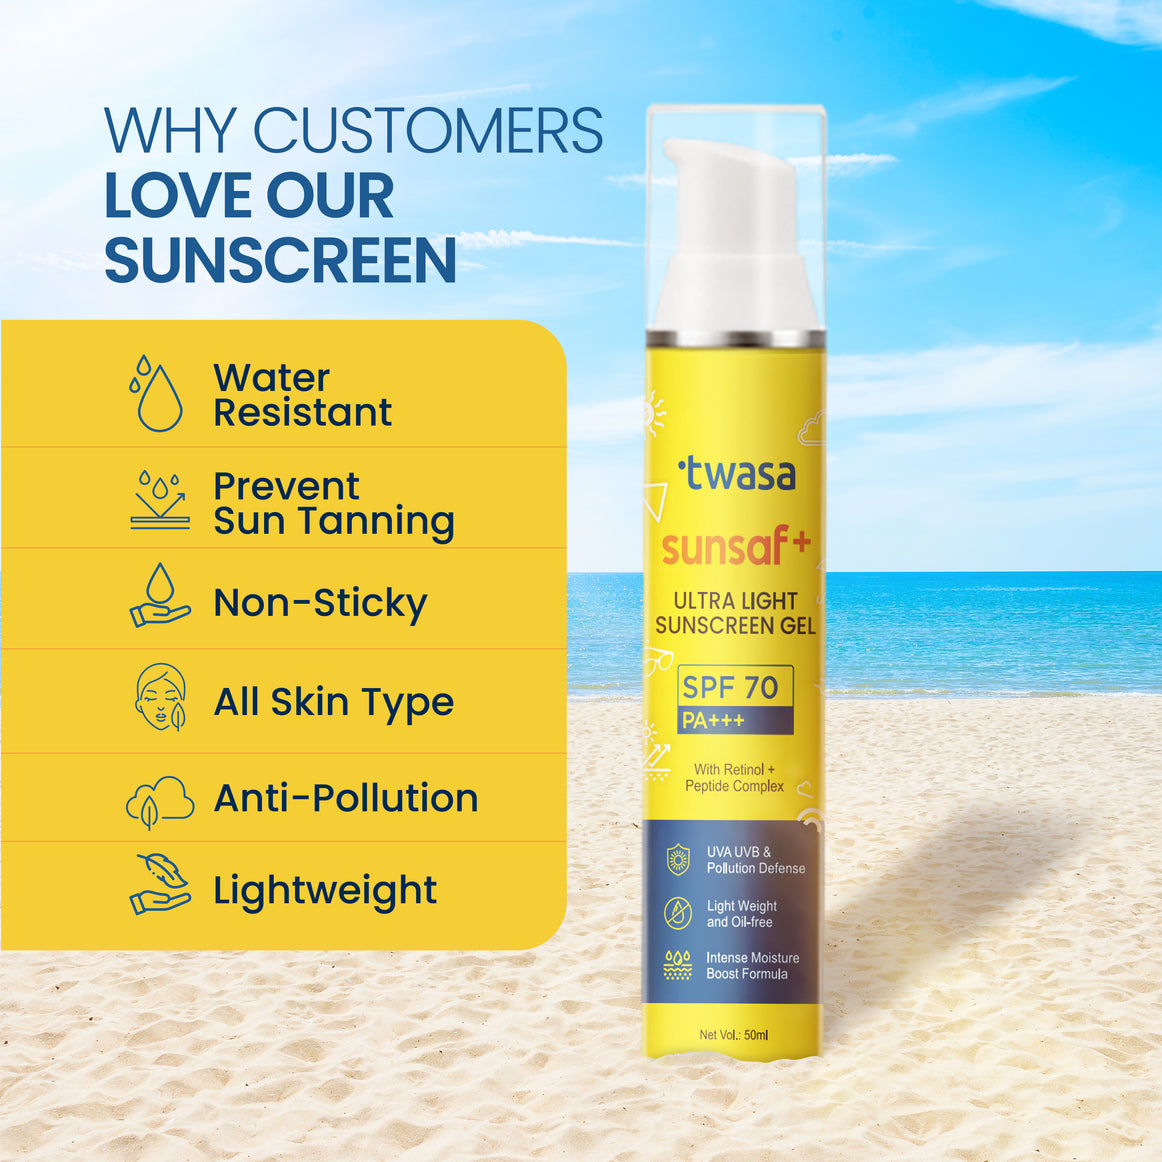 Experience our specially formulated sunscreen gel for oily skin, providing effective protection without clogging pores or causing greasiness.